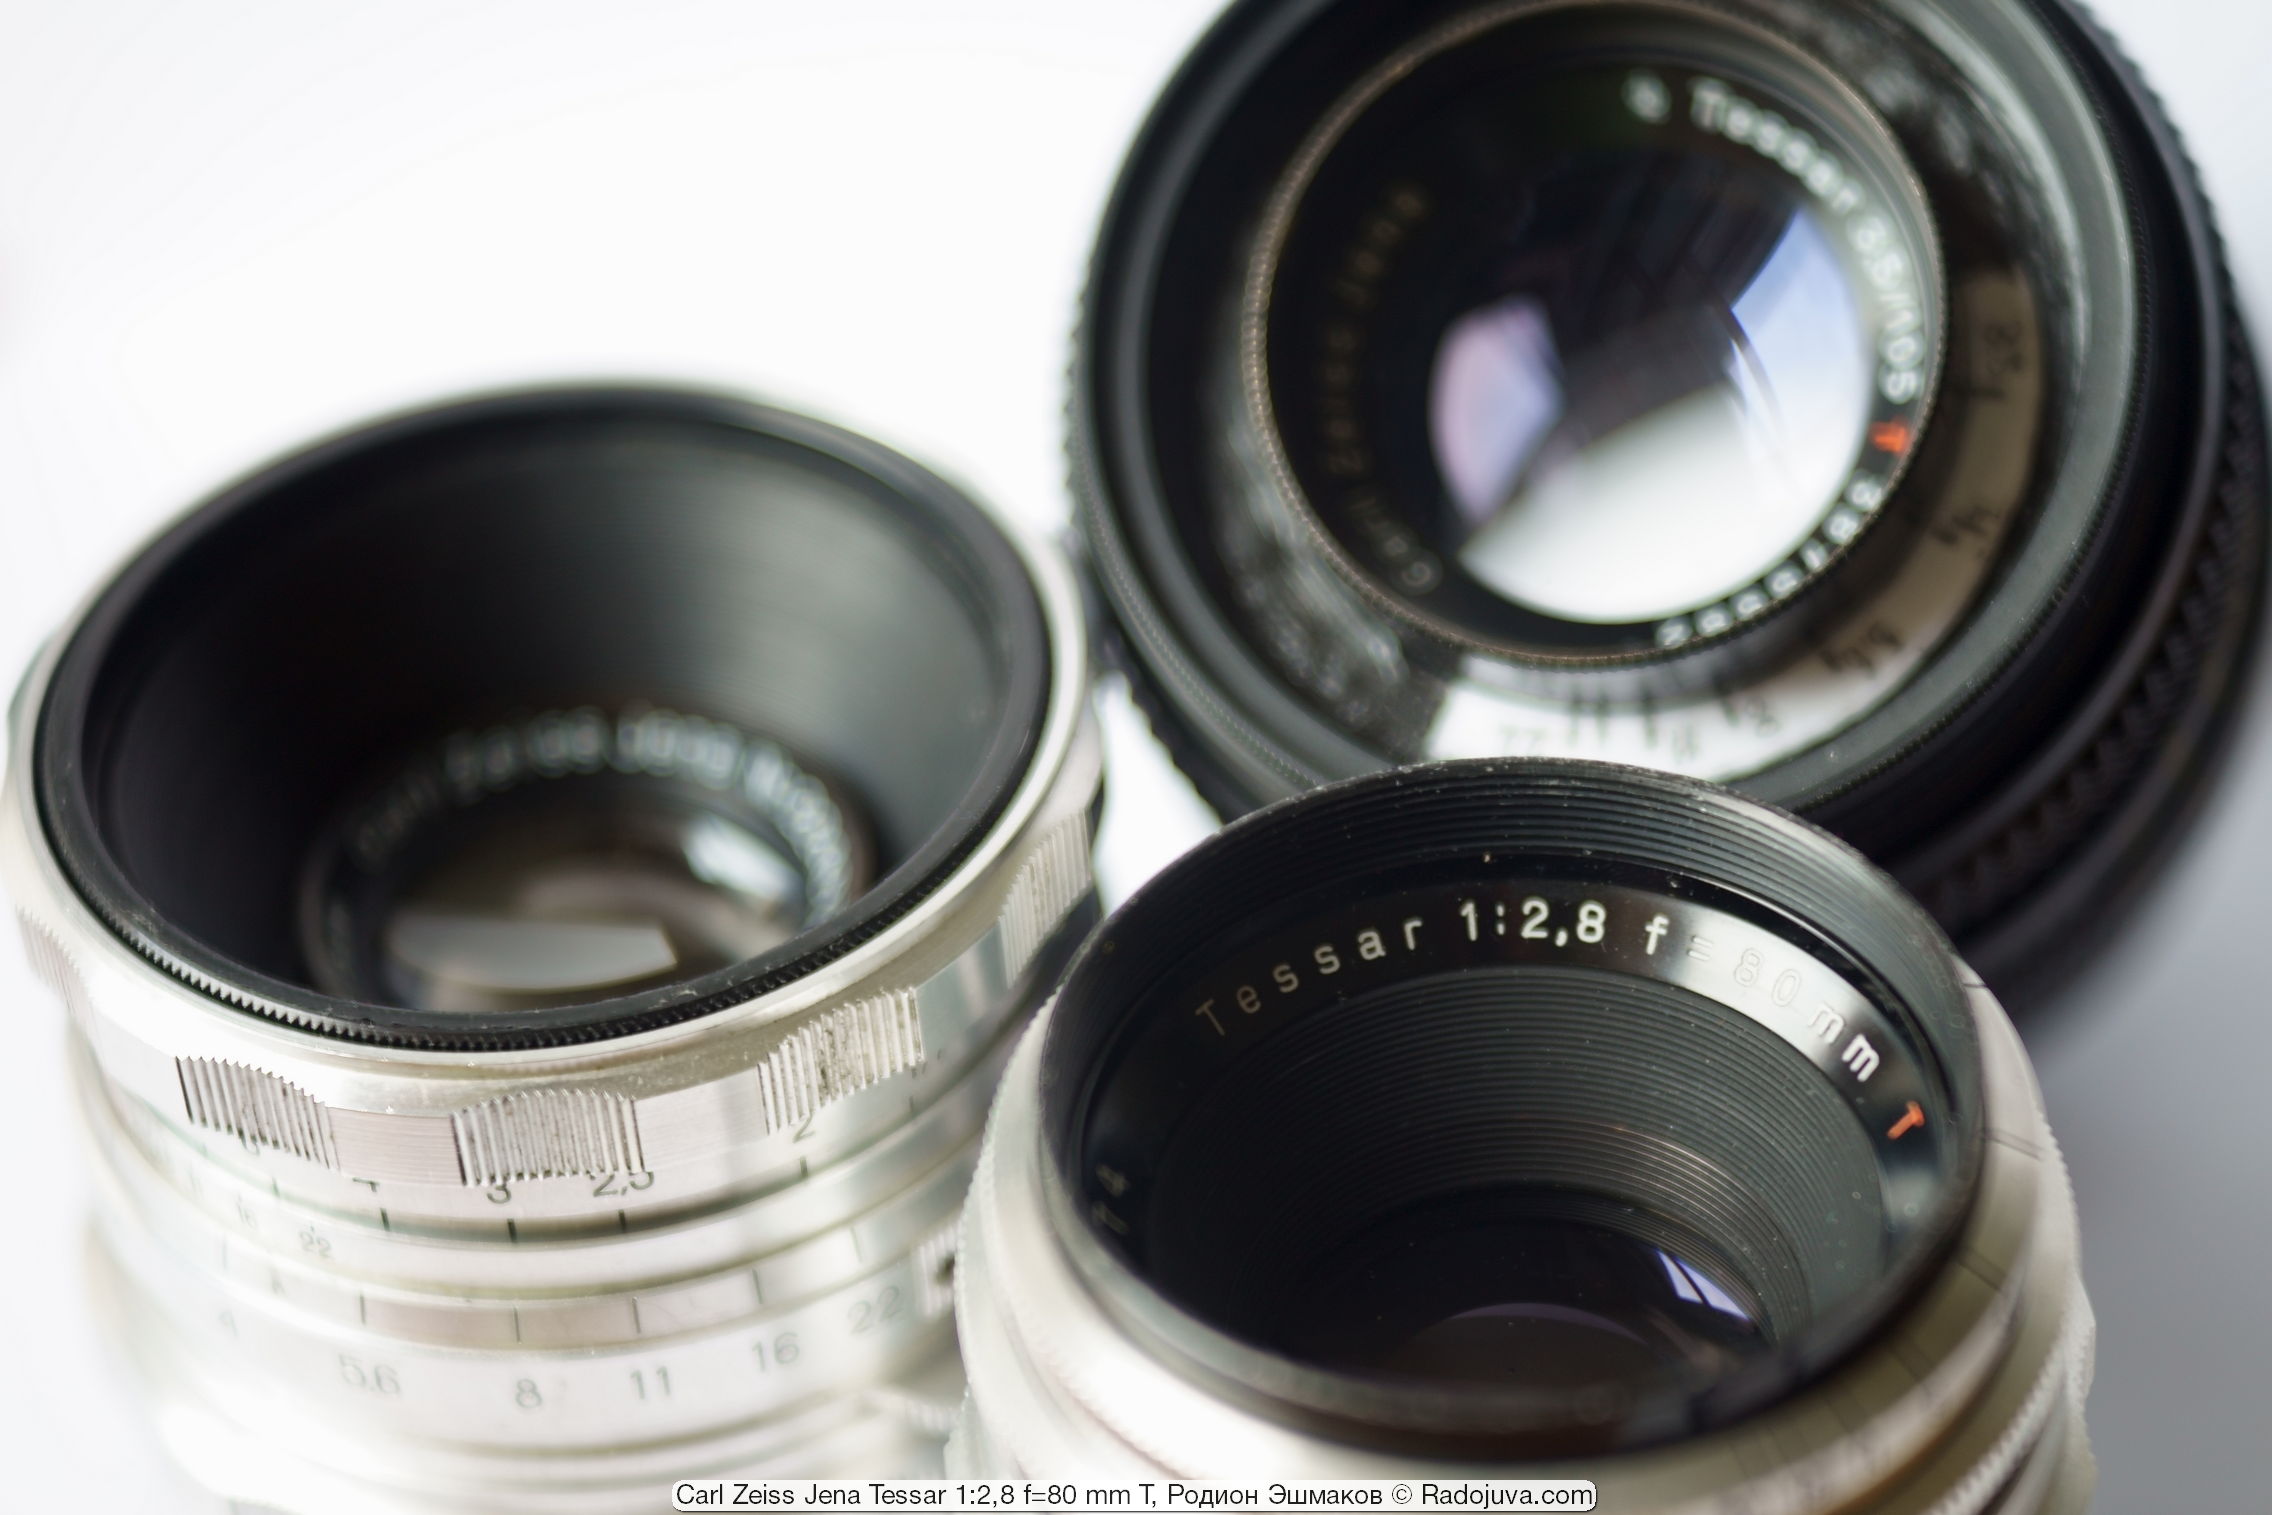 Carl Zeiss Jena Tessar 80 / 2.8 T and other Tessar lenses: 75 / 2.8